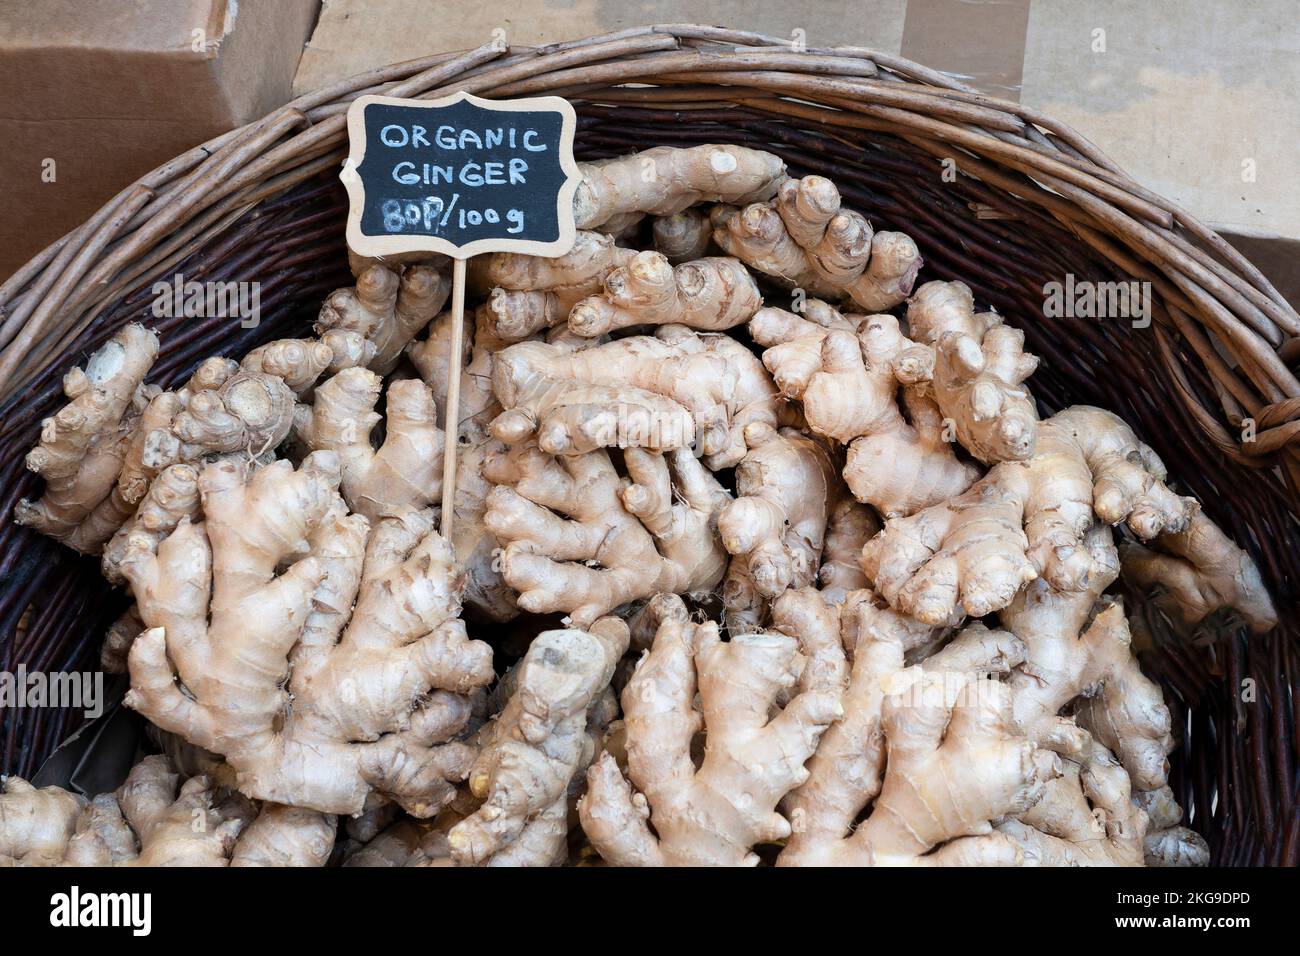 Fresh organic ginger, Zingiber officinale, for sale in on a fresh food market stall.The ginger root is displayed in a basket with a price tag per 100g Stock Photo